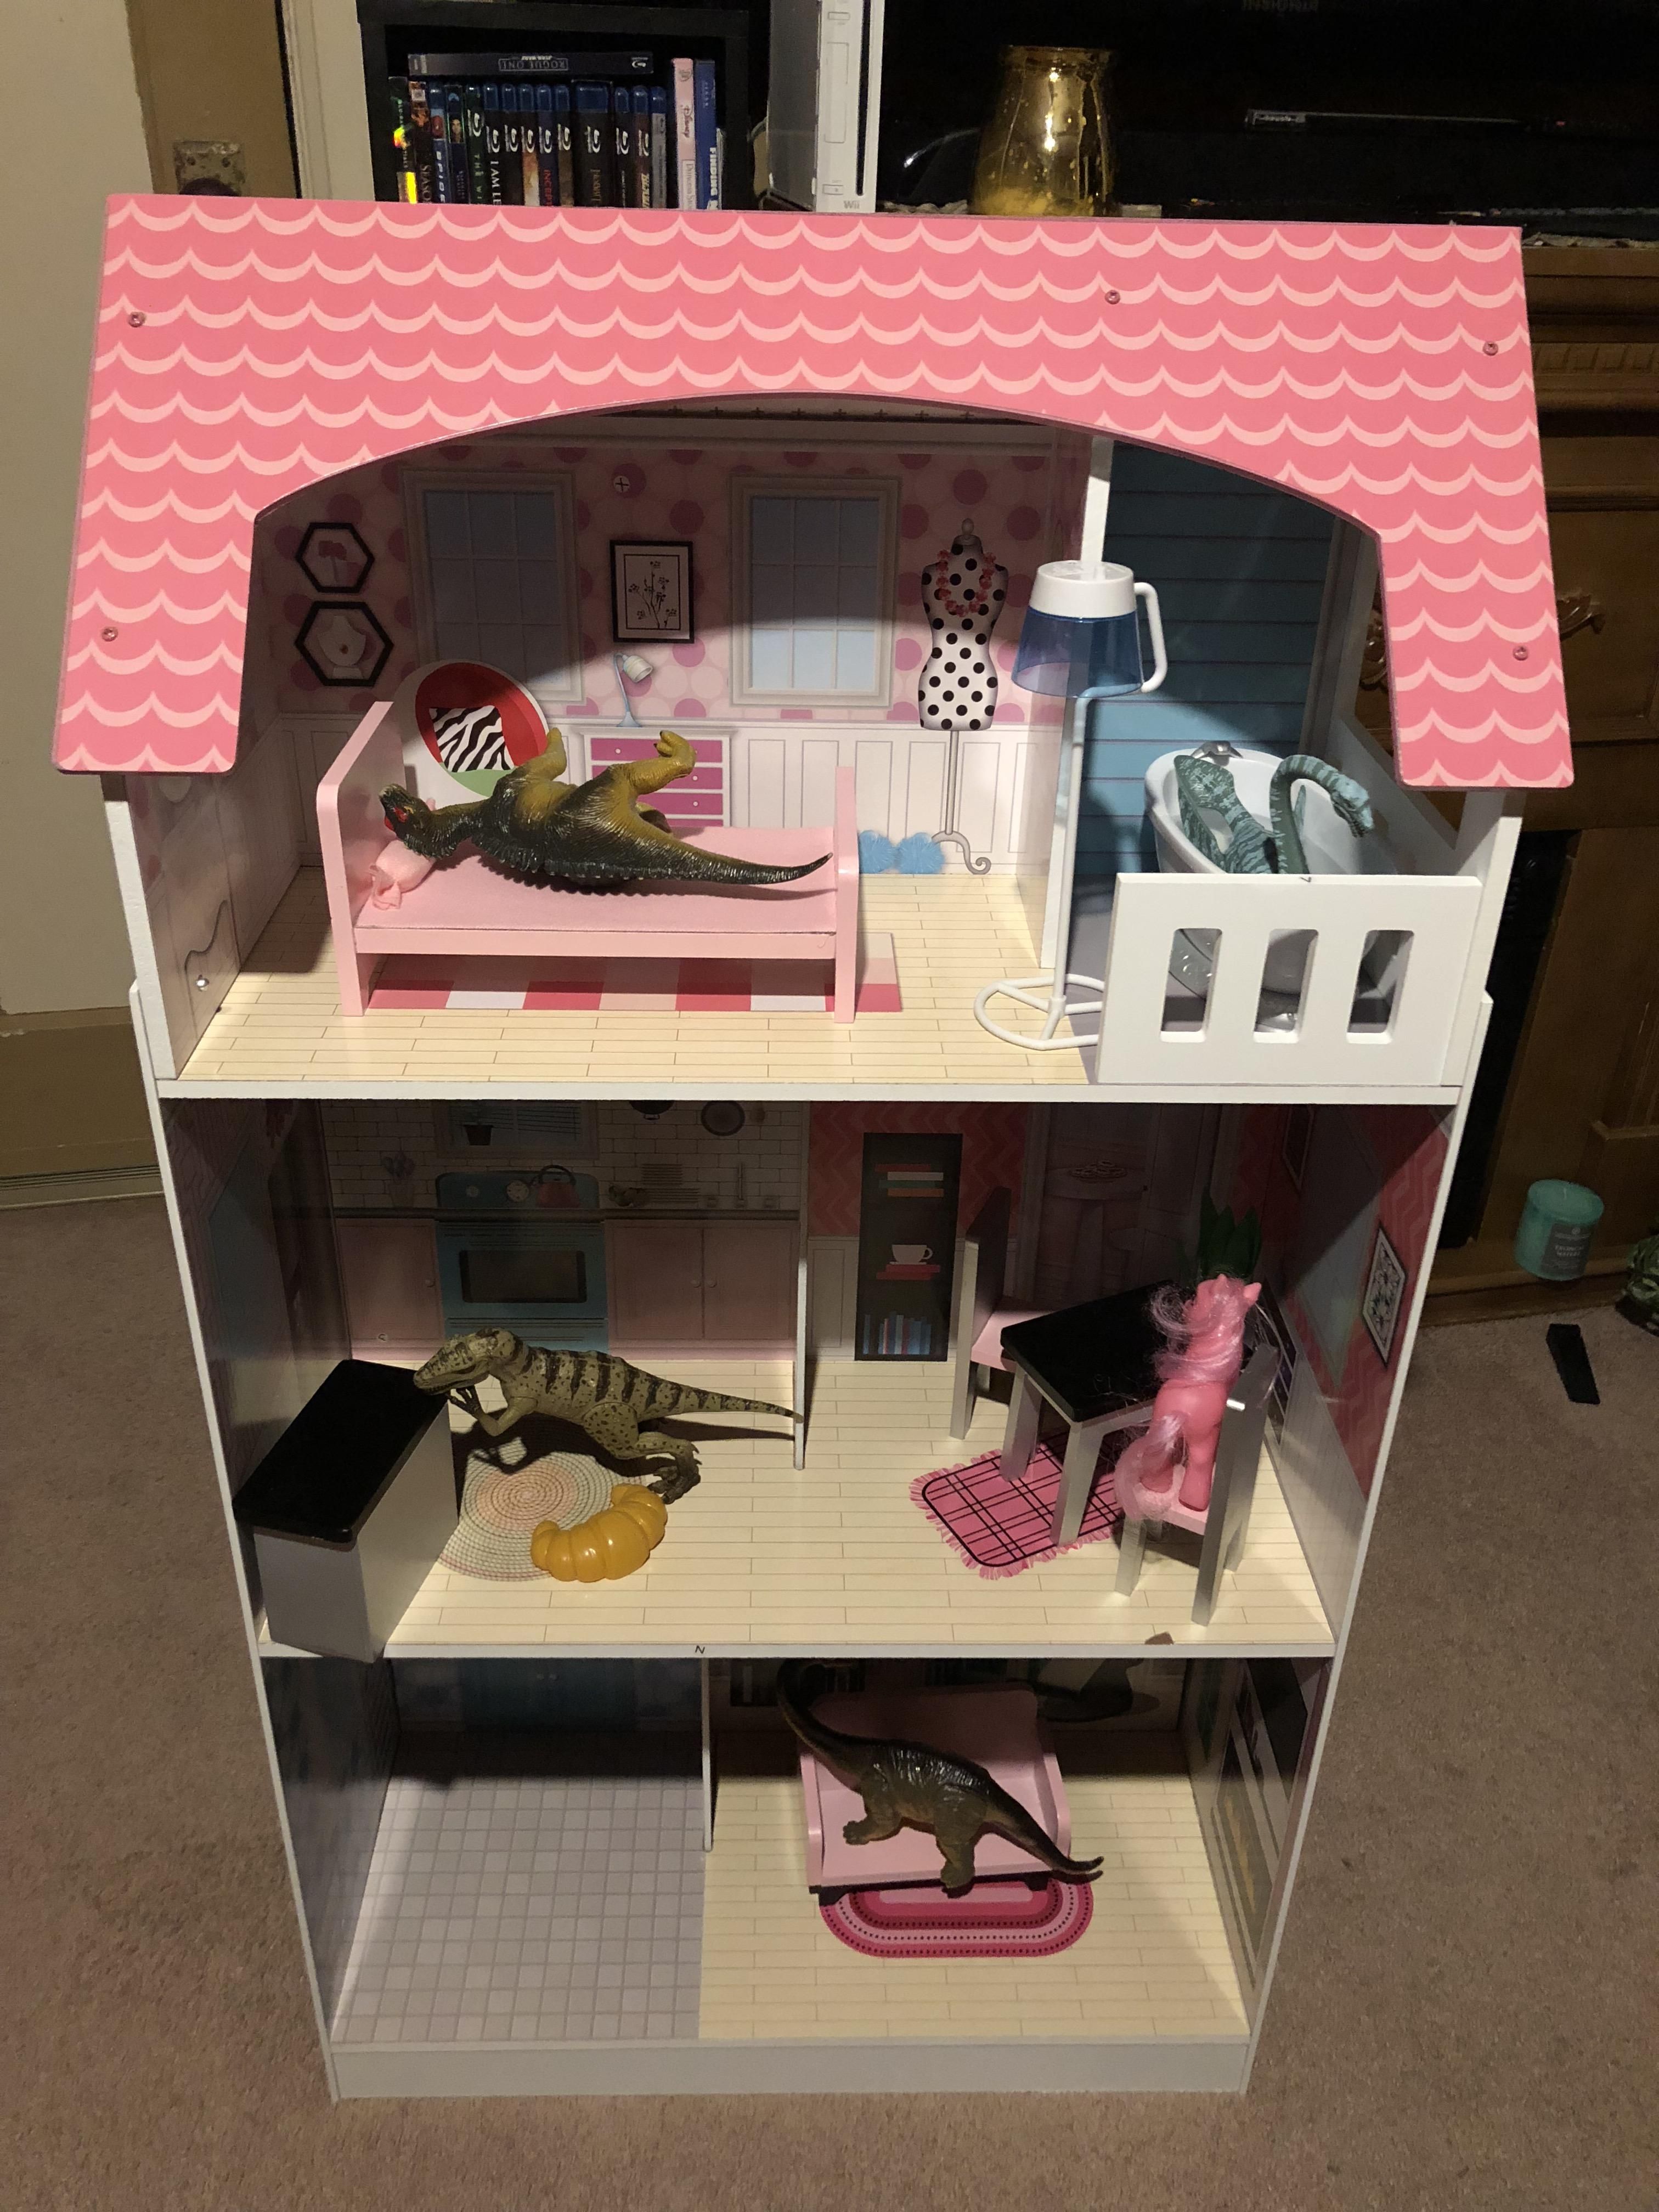 My 7 year old sister loves dinosaurs but my parents got her a dollhouse for Christmas. This is what I came home to tonight...